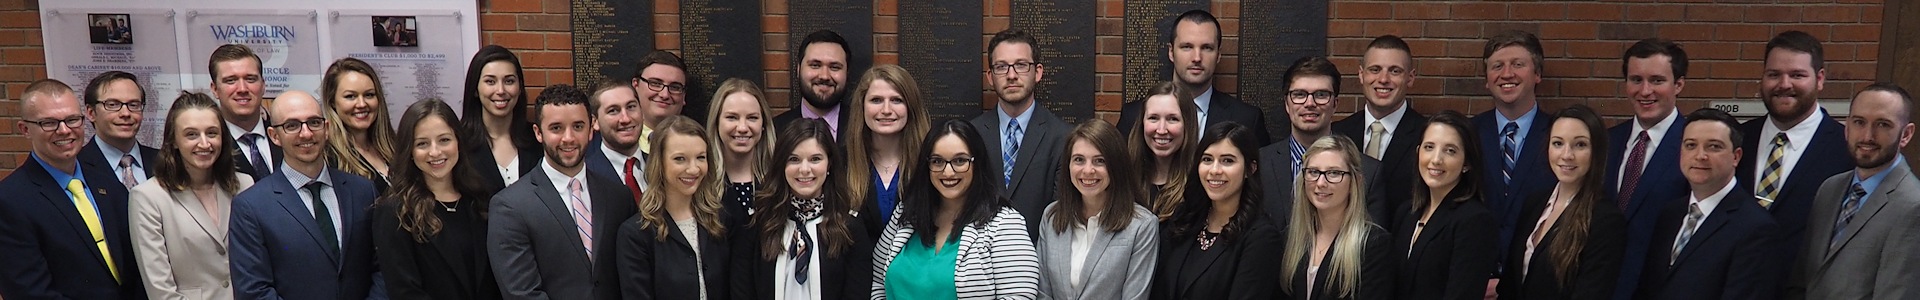 Photograph: Washburn Law Journal volume 58 board of editors and staff.